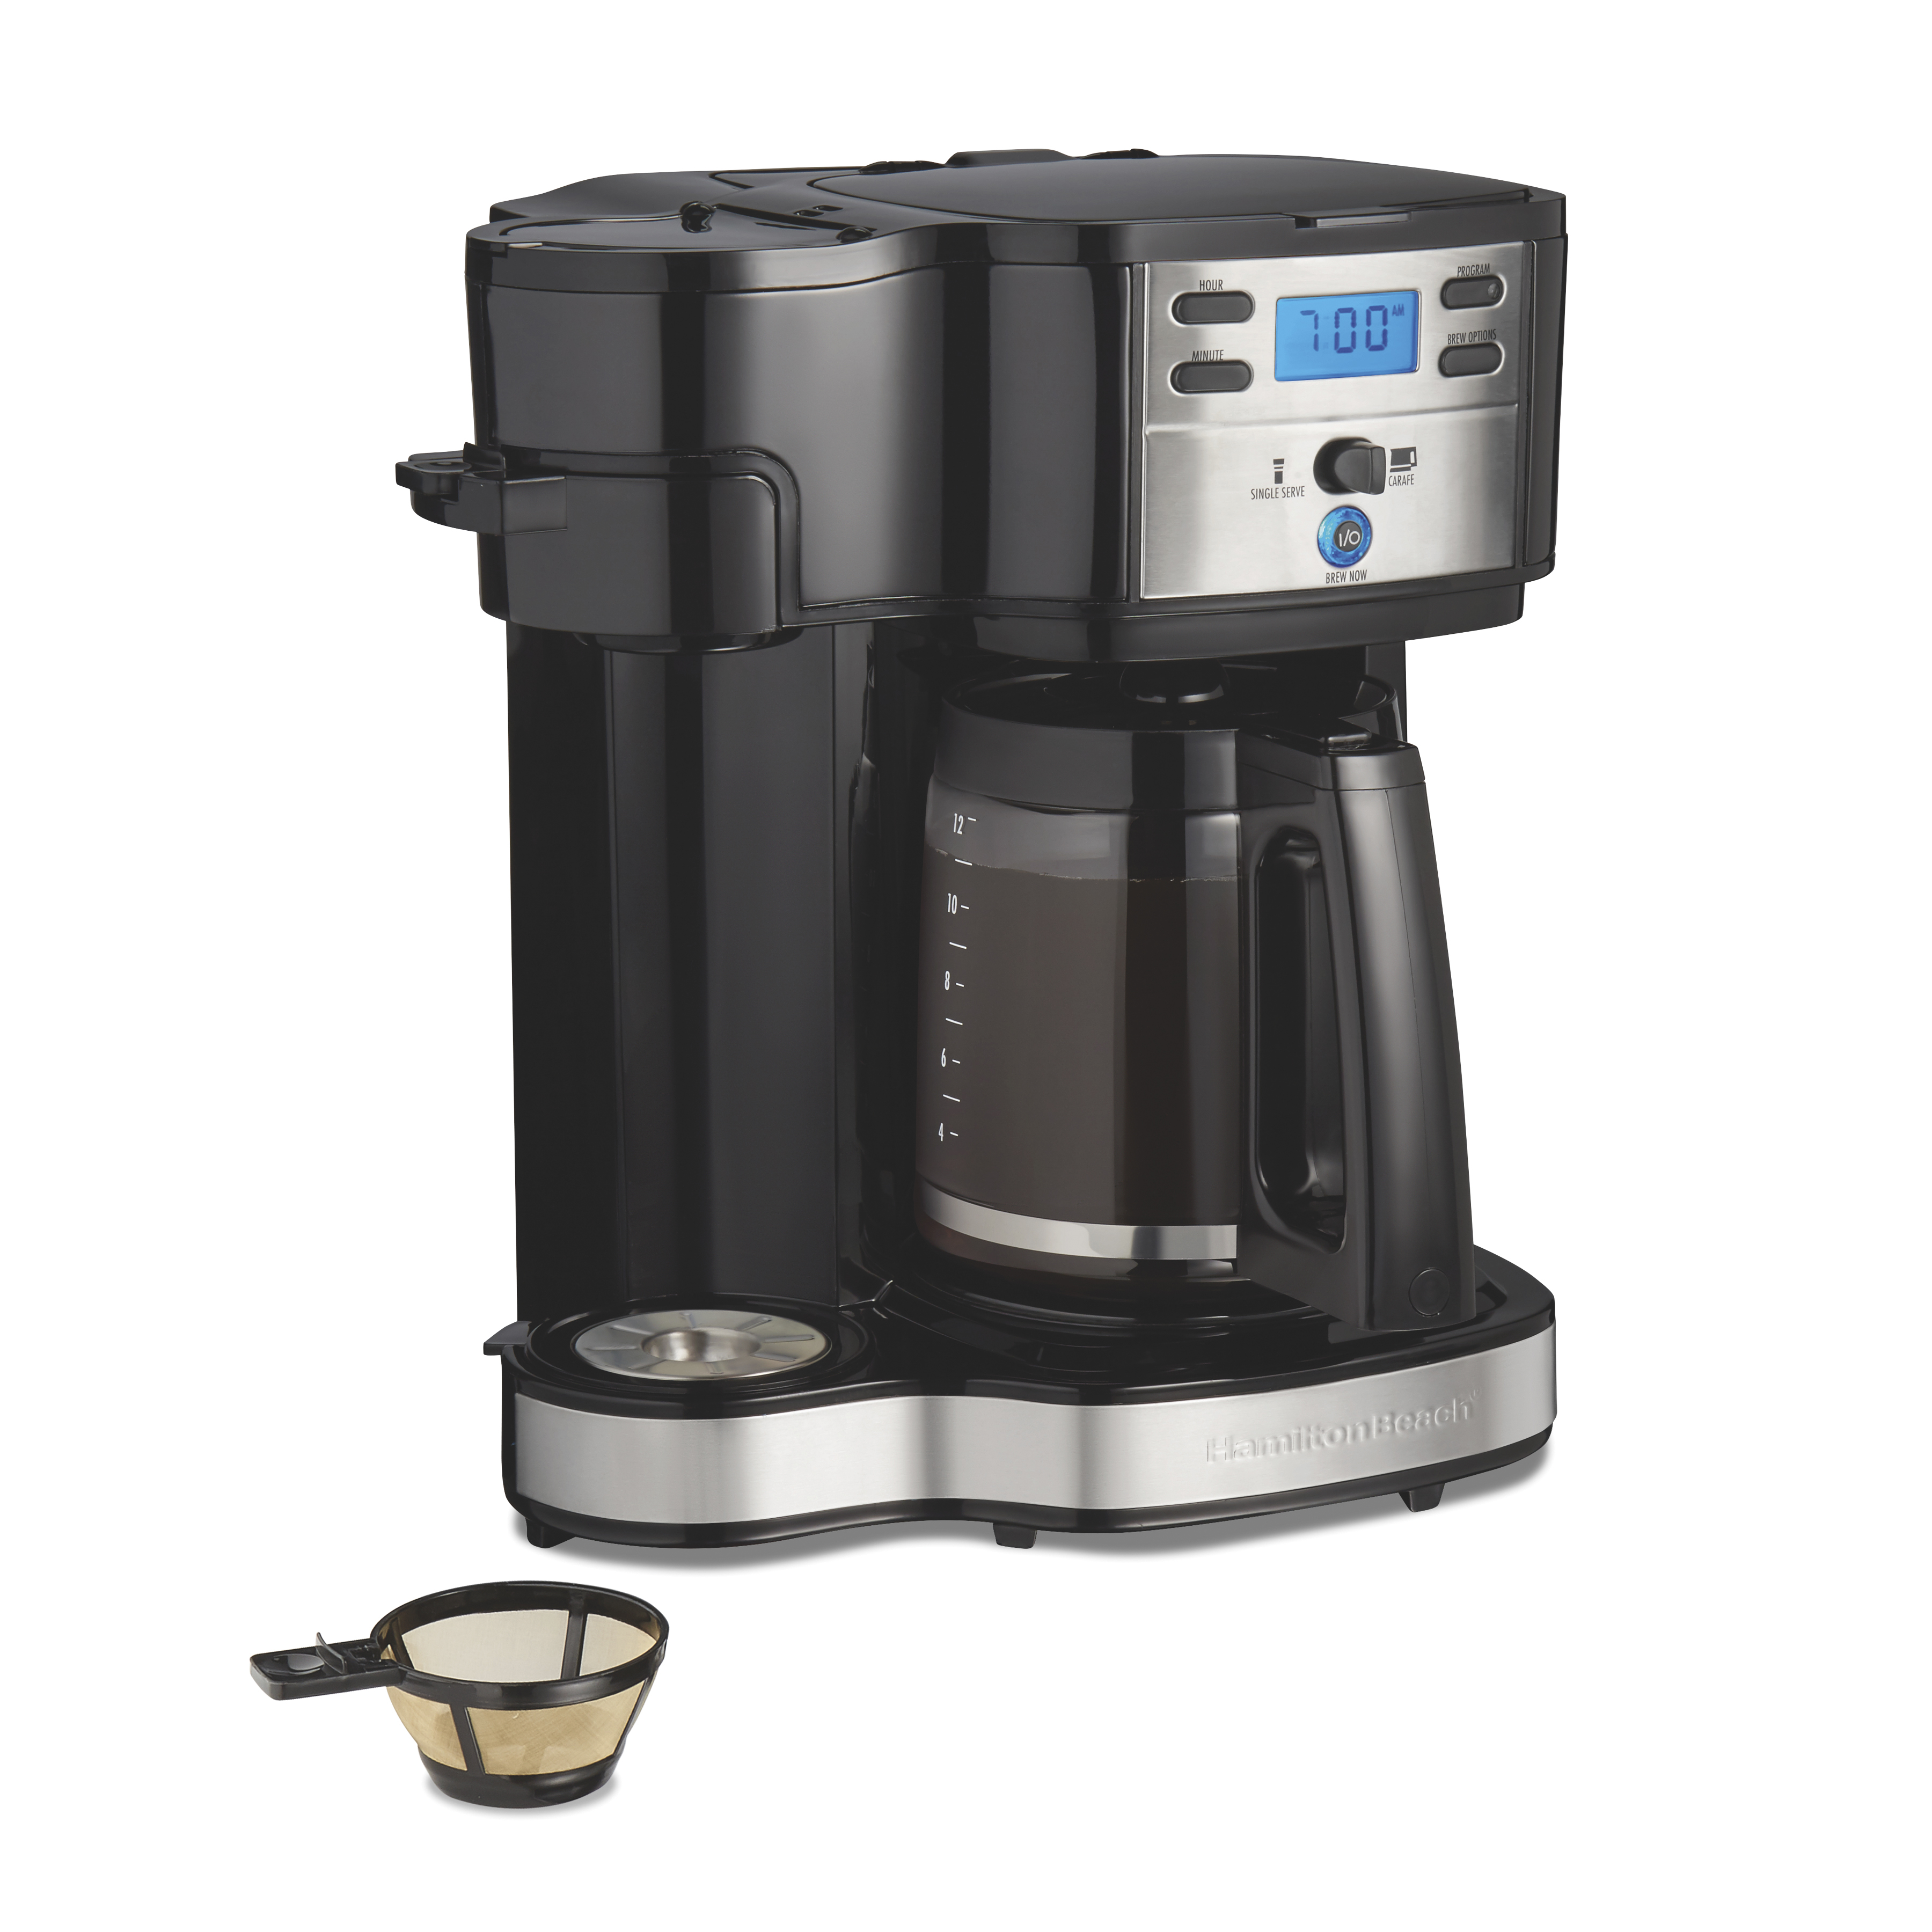 Hamilton Beach 2-Way Programmable Coffee Maker, Single-Serve and 12-Cup Pot, Glass Carafe, Stainless Steel, New, 47650 - image 1 of 8